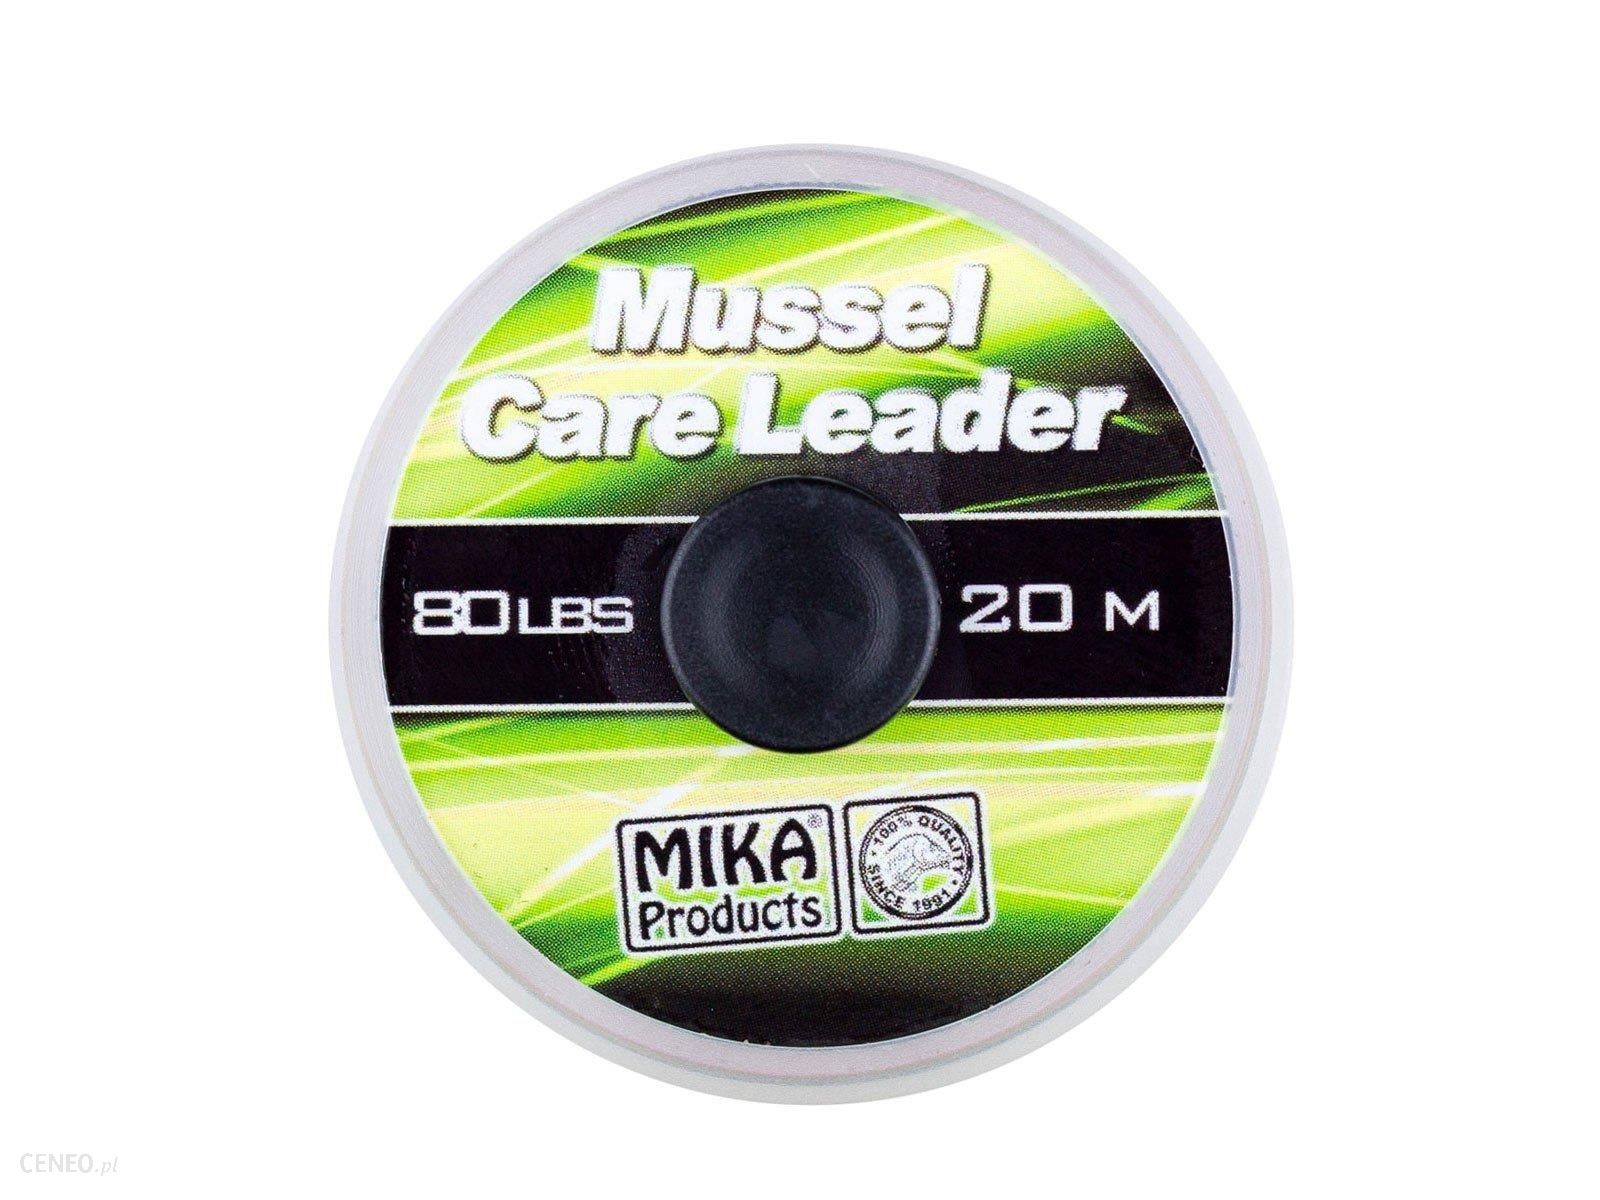 Mika Products Leadcore Mussel Care 80 Lbs 20M